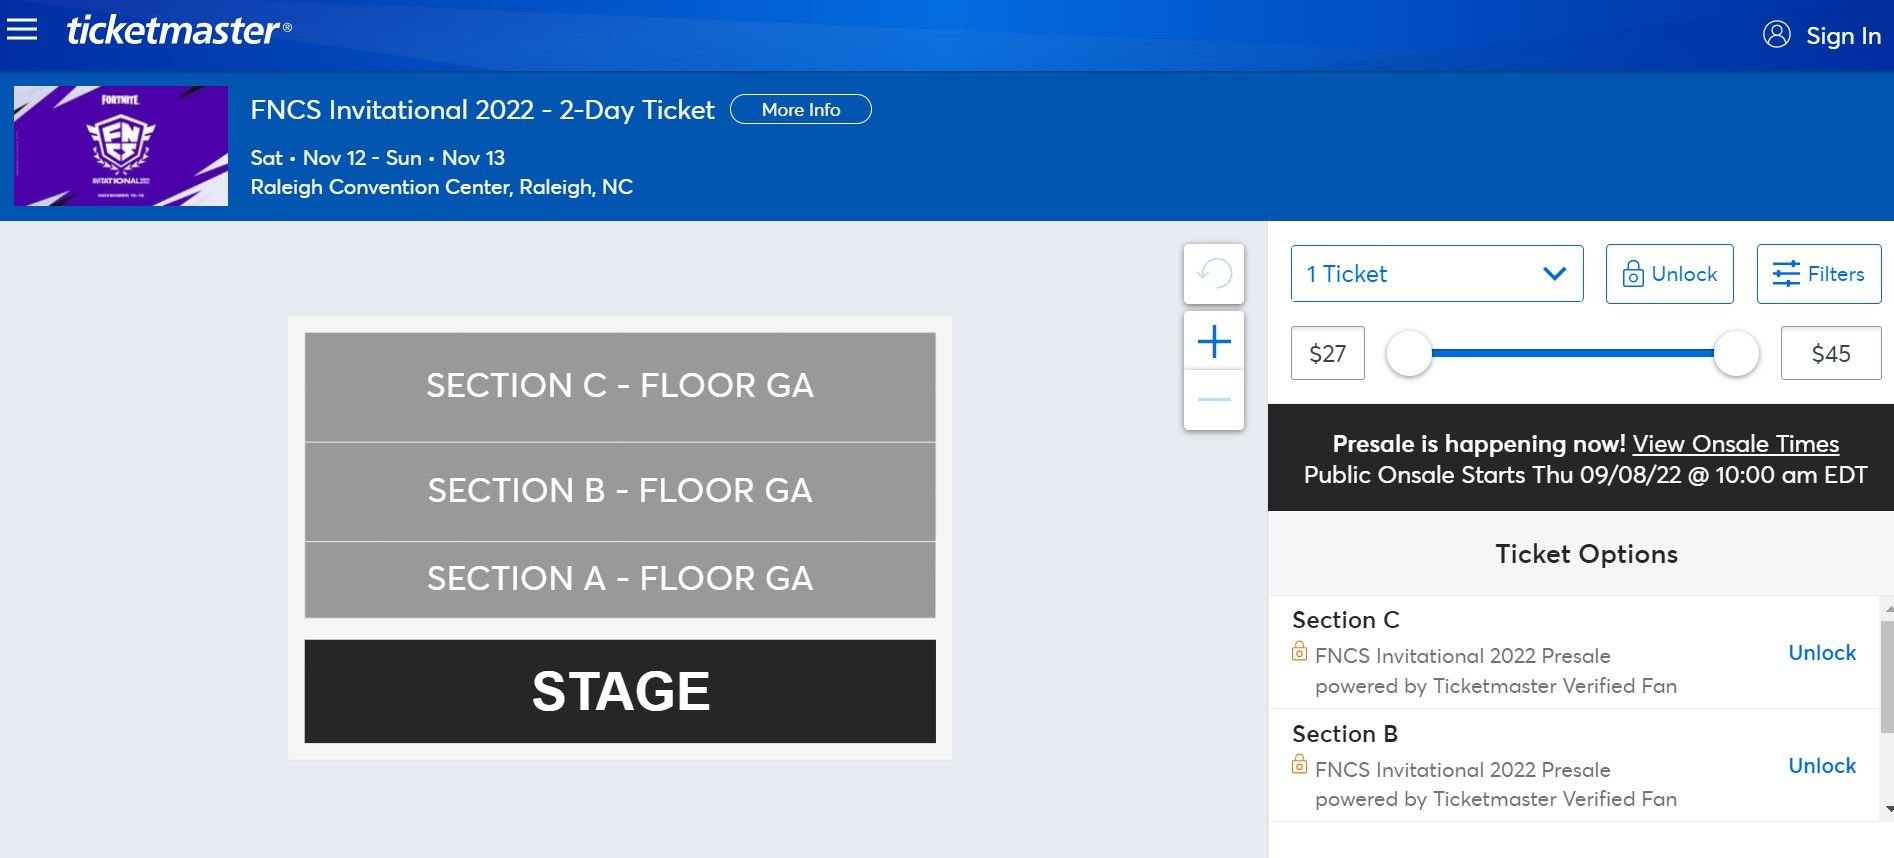 Ticketmaster page for FNCS Invitational 2022 tickets